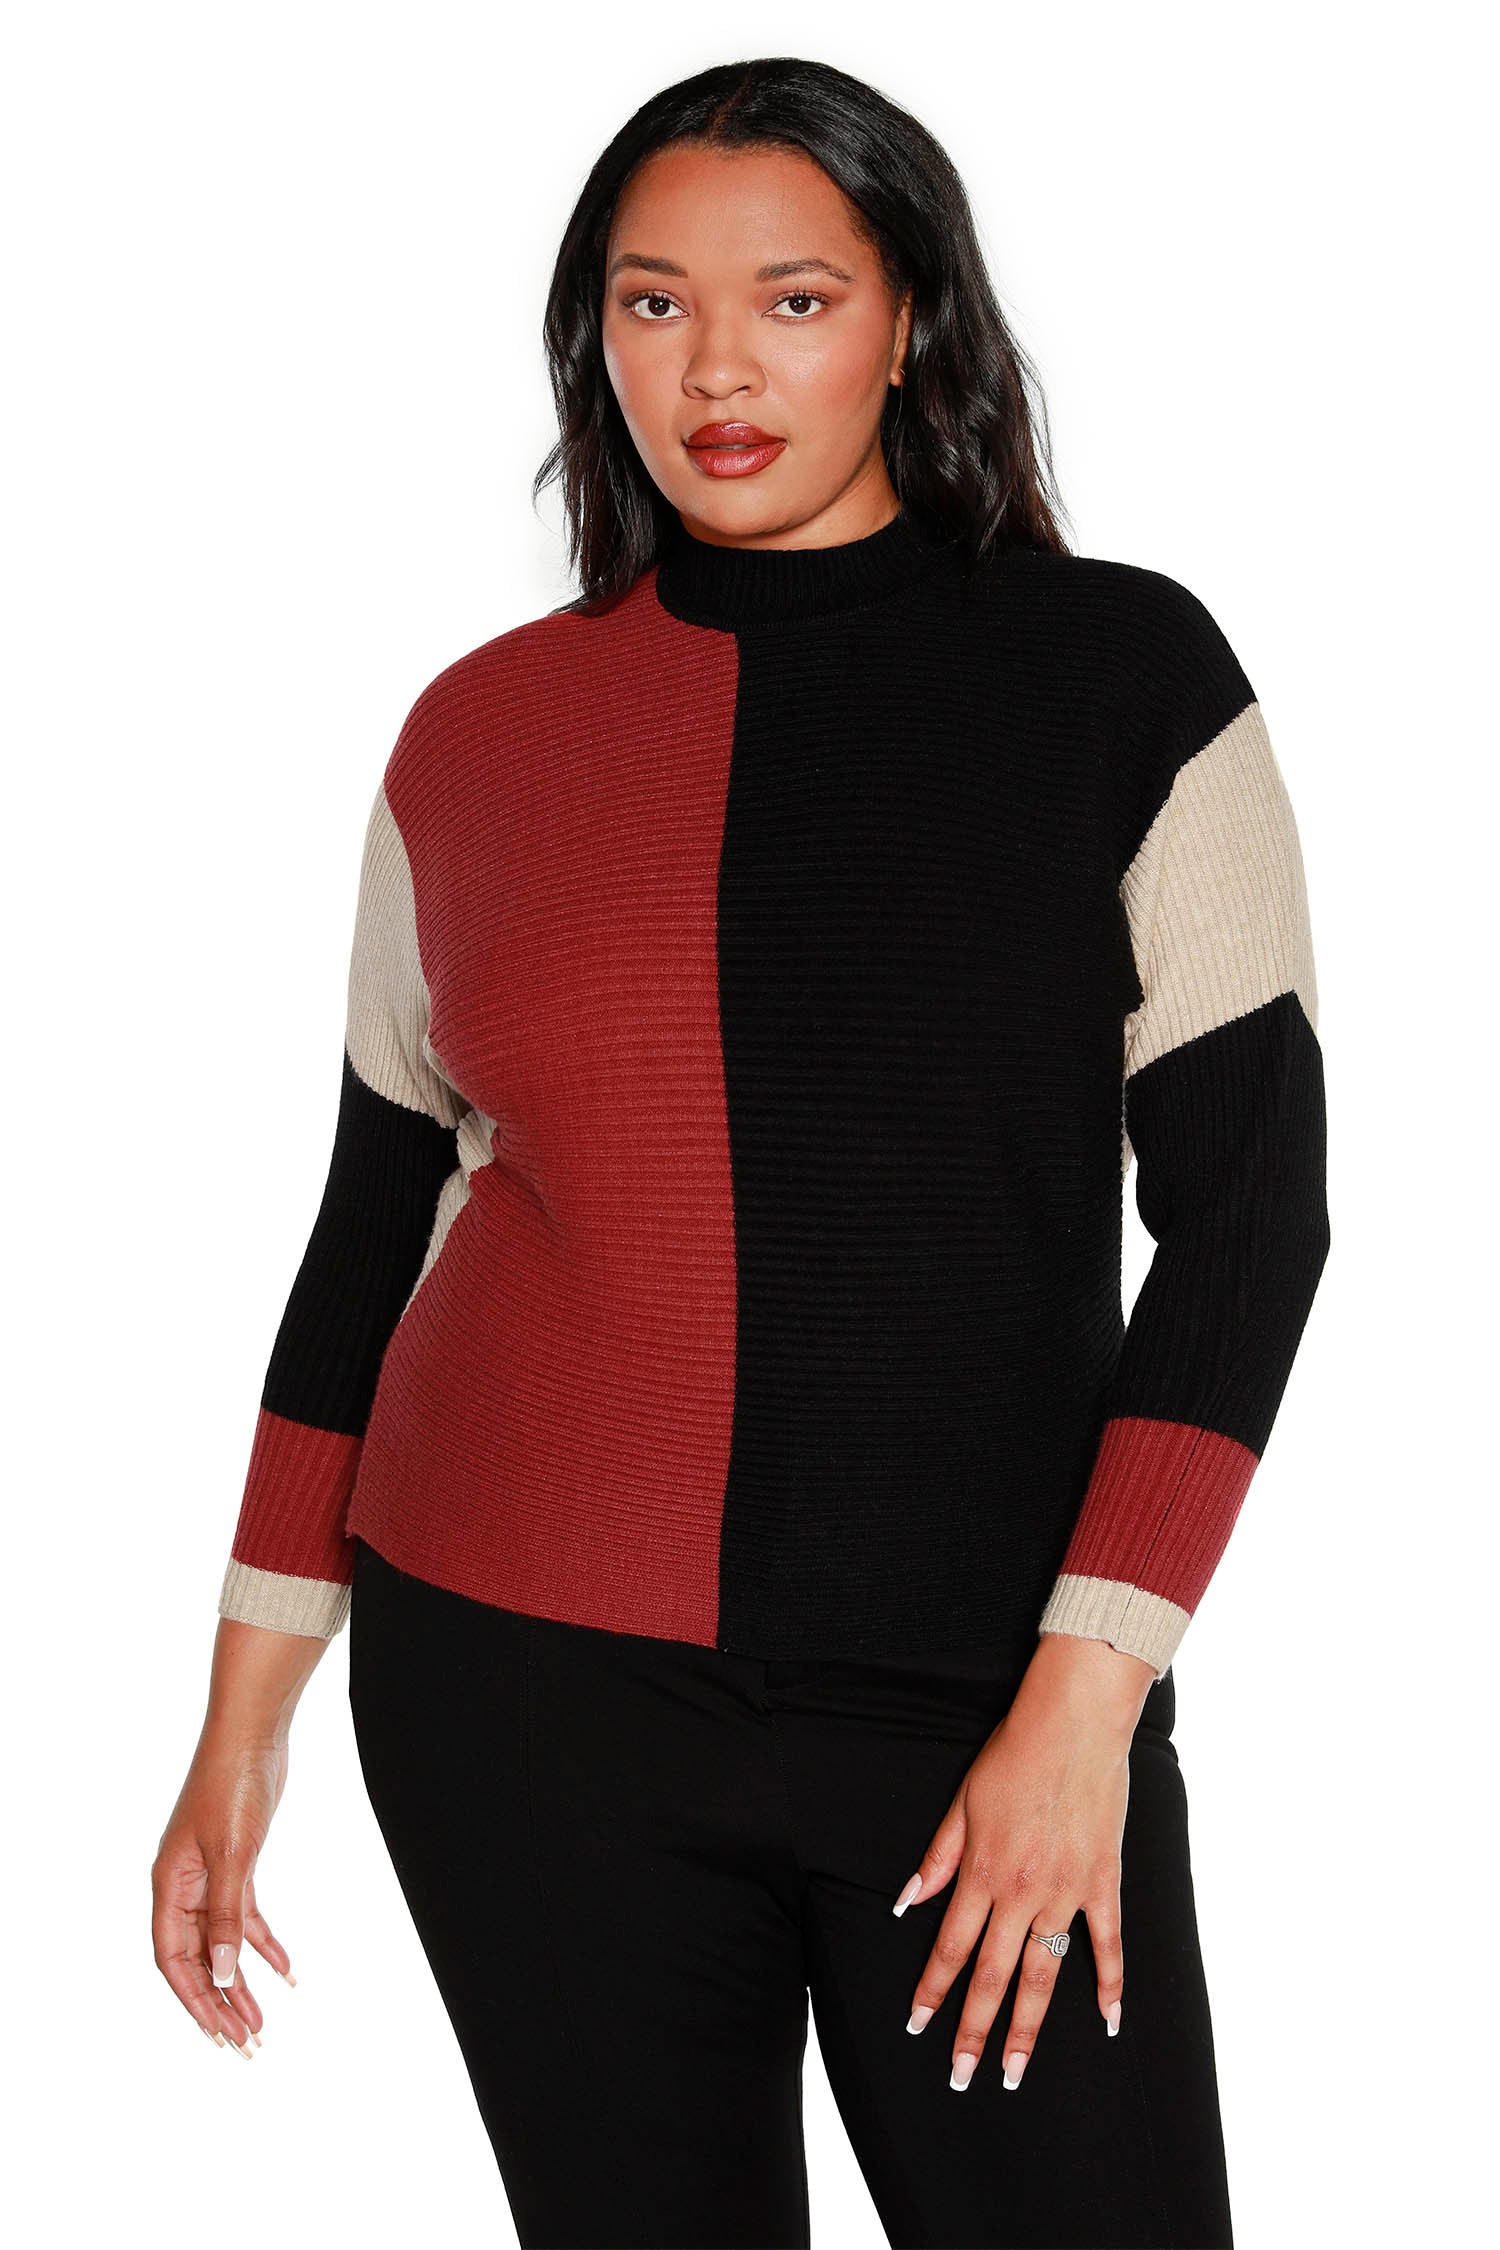 Women's Pullover Sweater in a Soft Mini Rib Color Block Knit with a Mock Neck | Curvy